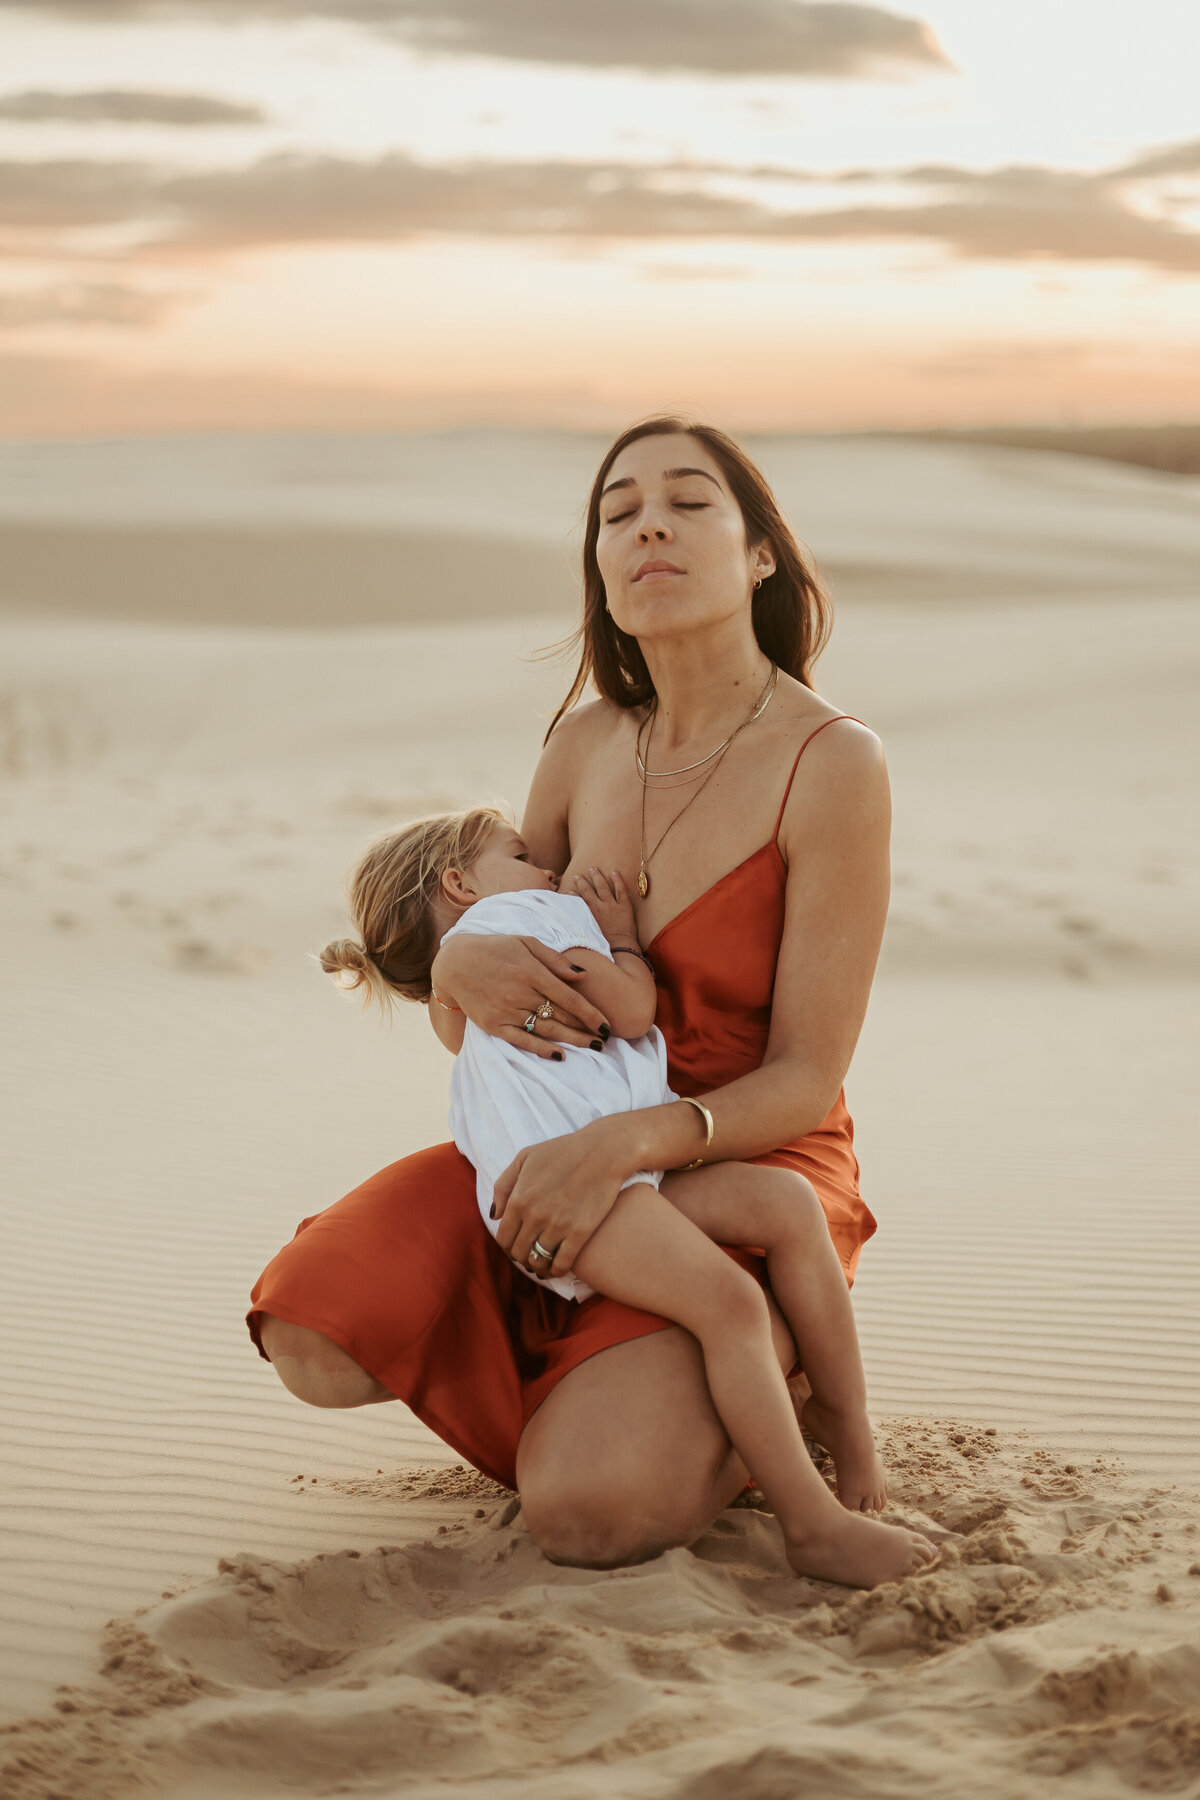 Mum in an orange dress with her eyes closed holding her daughter while she breastfeeds.